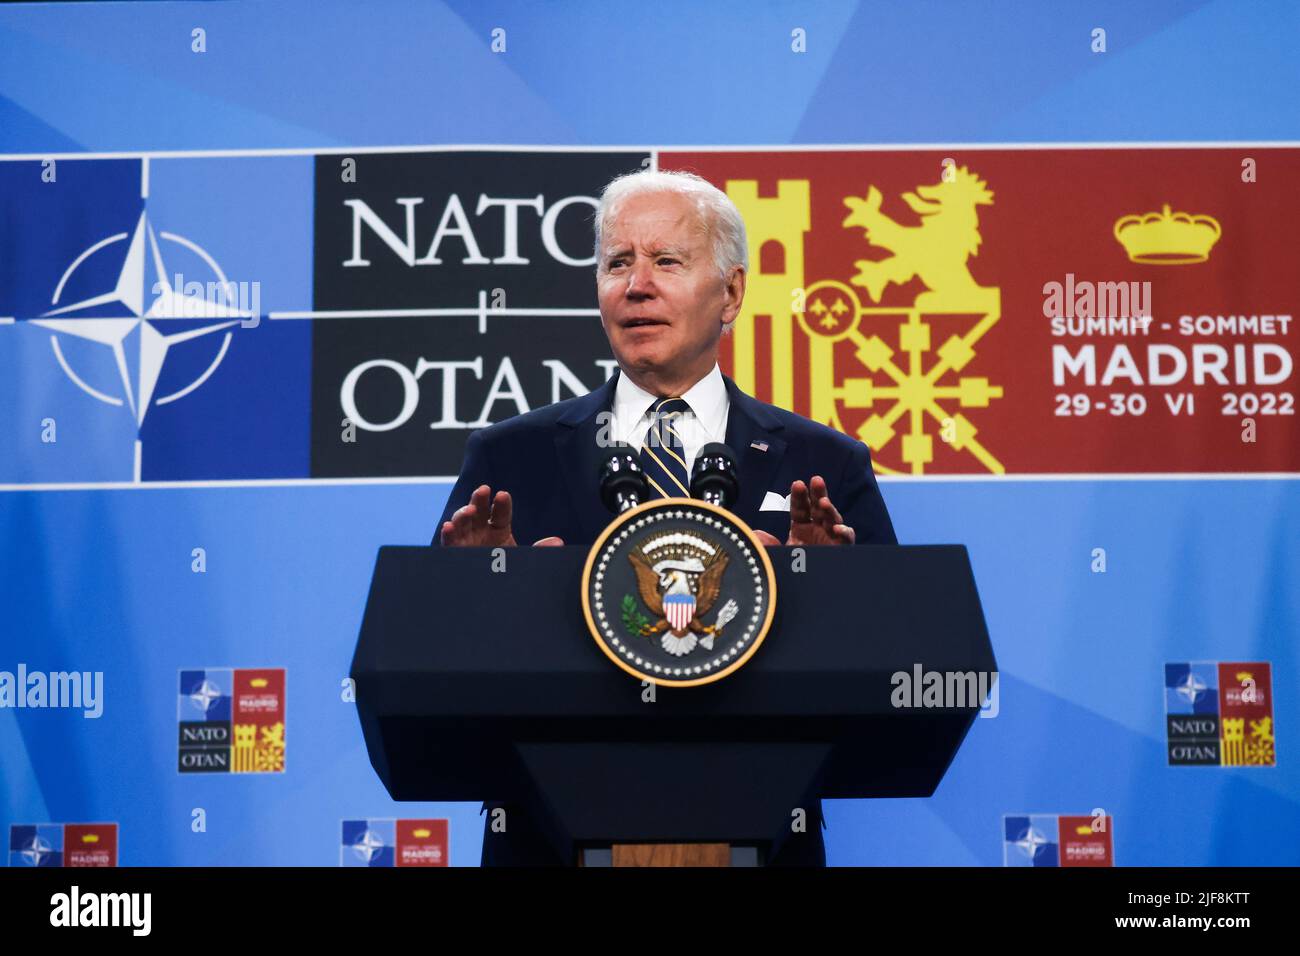 Madrid, Spain. 30th June, 2022. U.S. President Joe Biden is holding a press conference during the NATO Summit at the IFEMA congress centre in Madrid, Spain on June 30, 2022. (Credit Image: © Beata Zawrzel/ZUMA Press Wire) Stock Photo